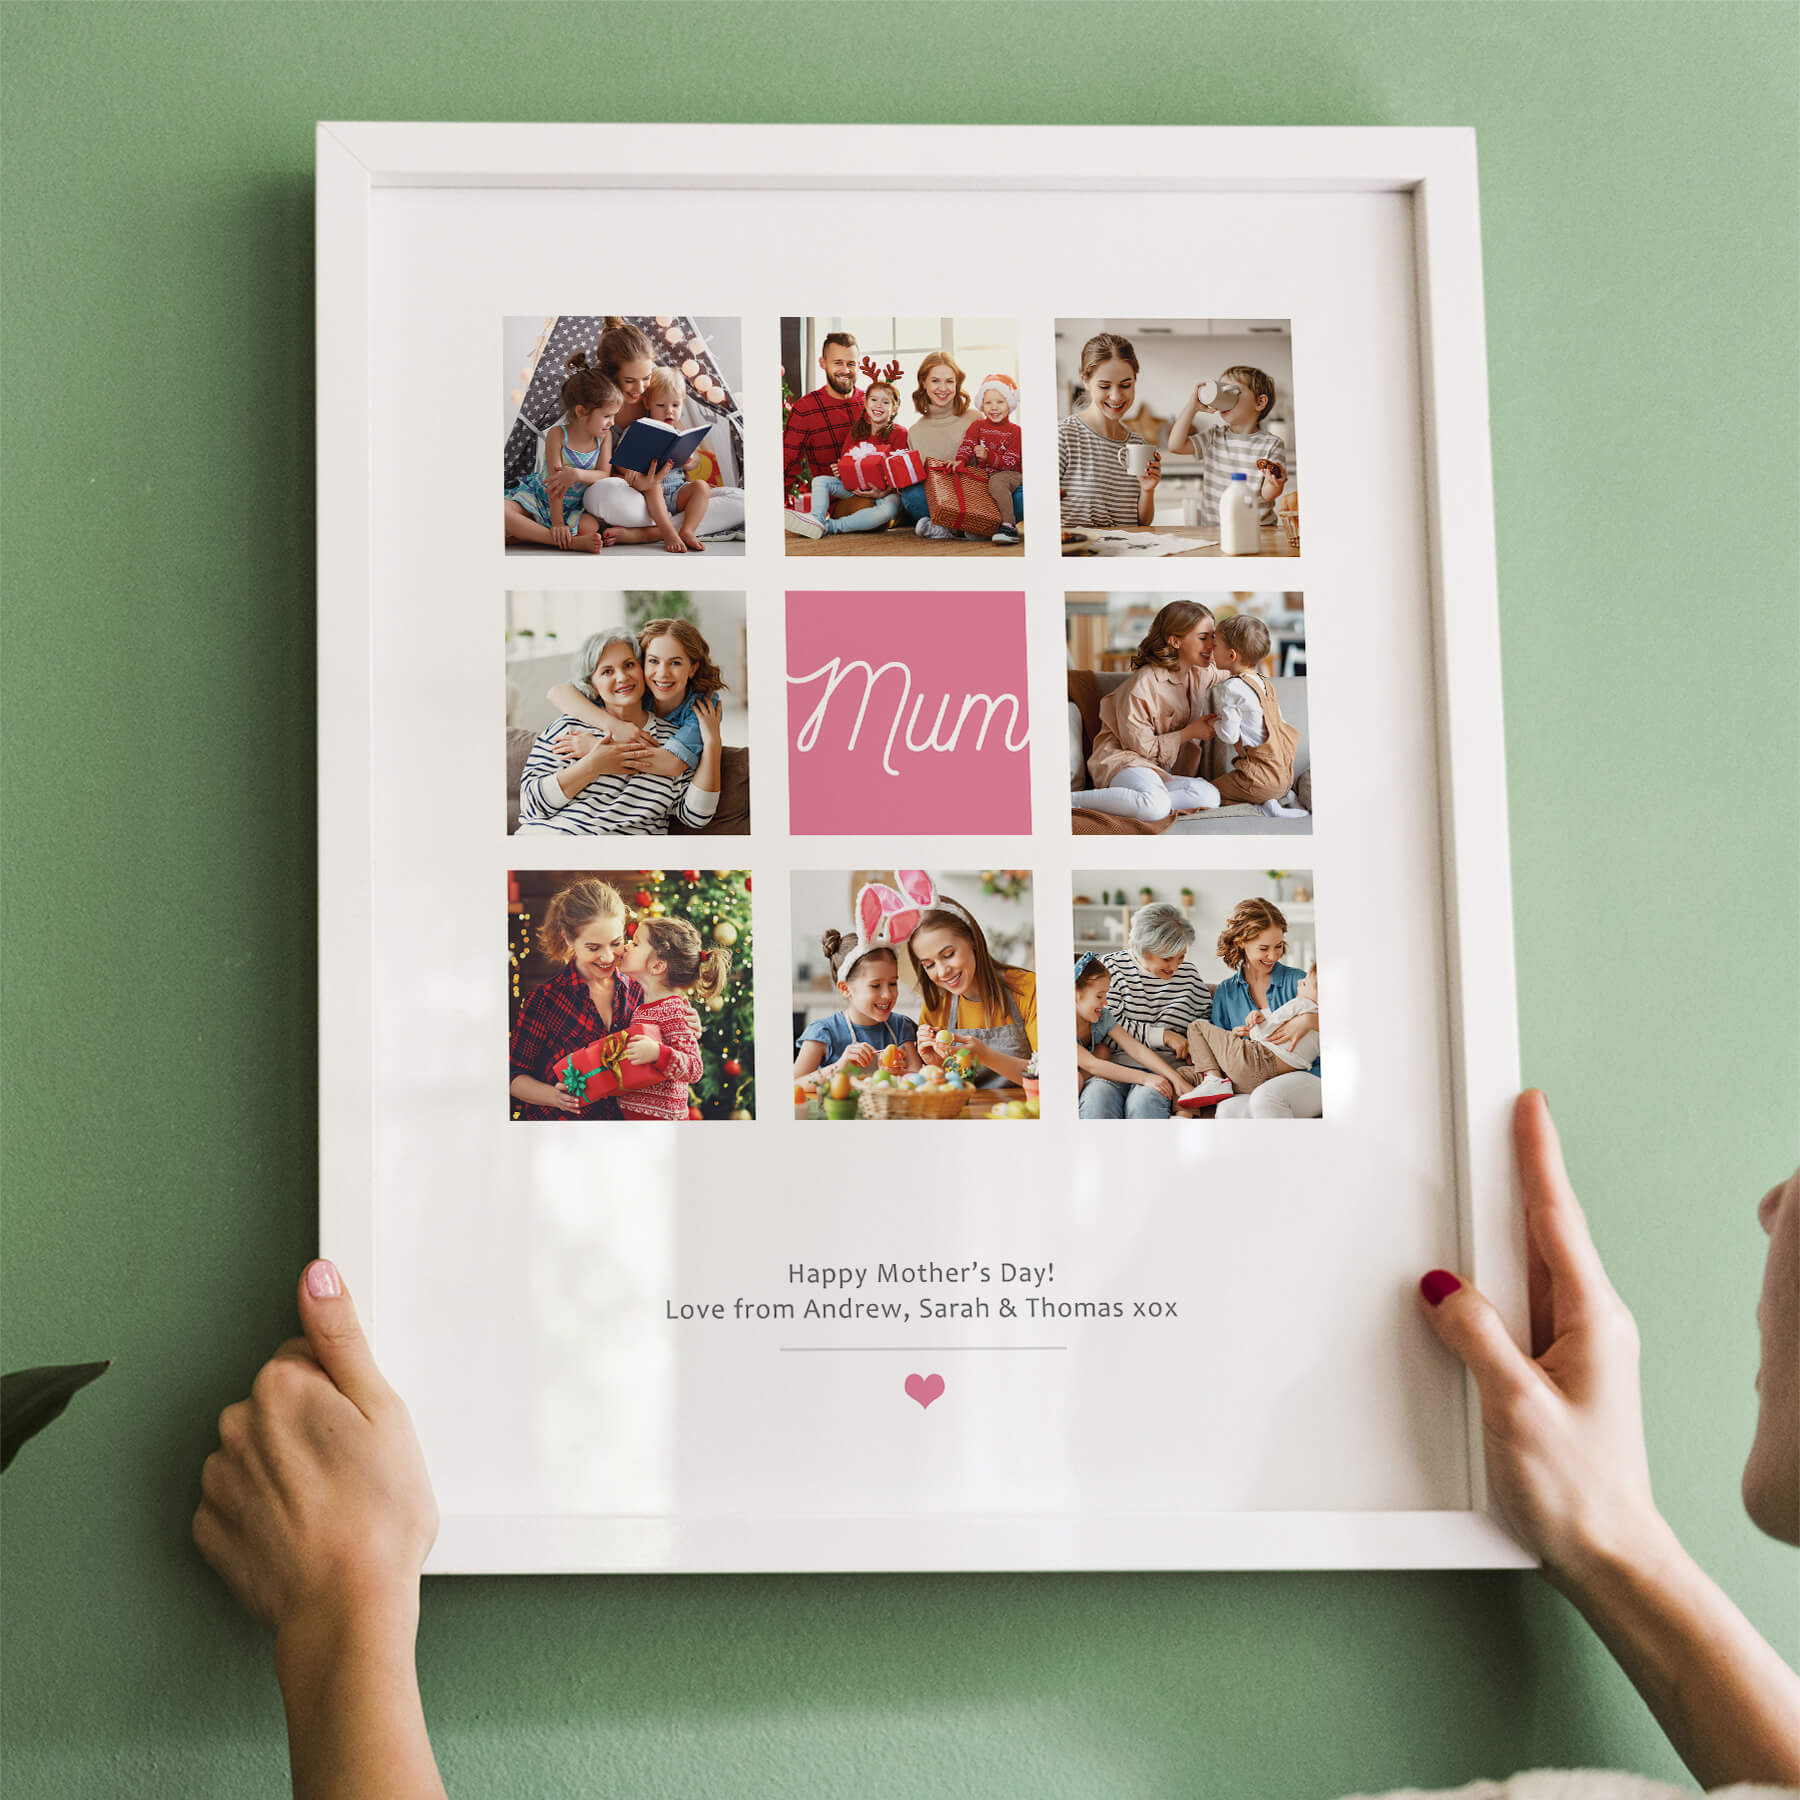 Personalised Mothers Day Gifts - Top 10 personalised presents for mum gift inspiration